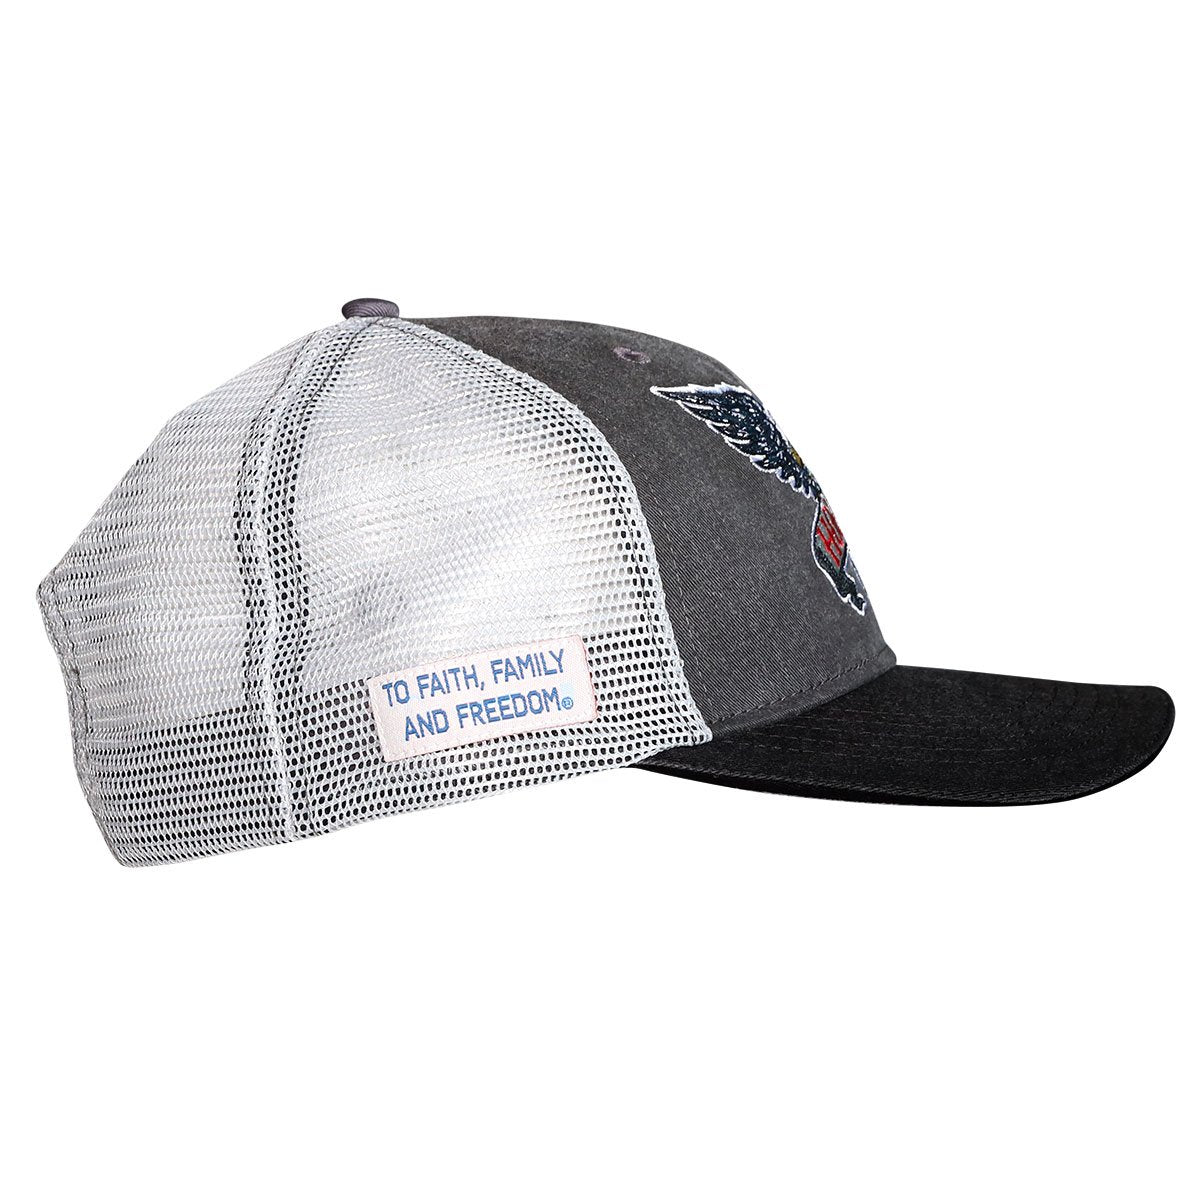 Declare your love of Faith, Family, Freedom in this HOLD FAST™ Cap in Black bill Grey front and a White back. Hold fast to these things so we can celebrate the sacrifice of those who serve in the United States Armed Forces—and ultimately because of the sacrifice of our Lord and Savior, Jesus Christ, on the cross at Calvary. When you pledge allegiance to the flag or see those colors flying in the breeze, think on these things.